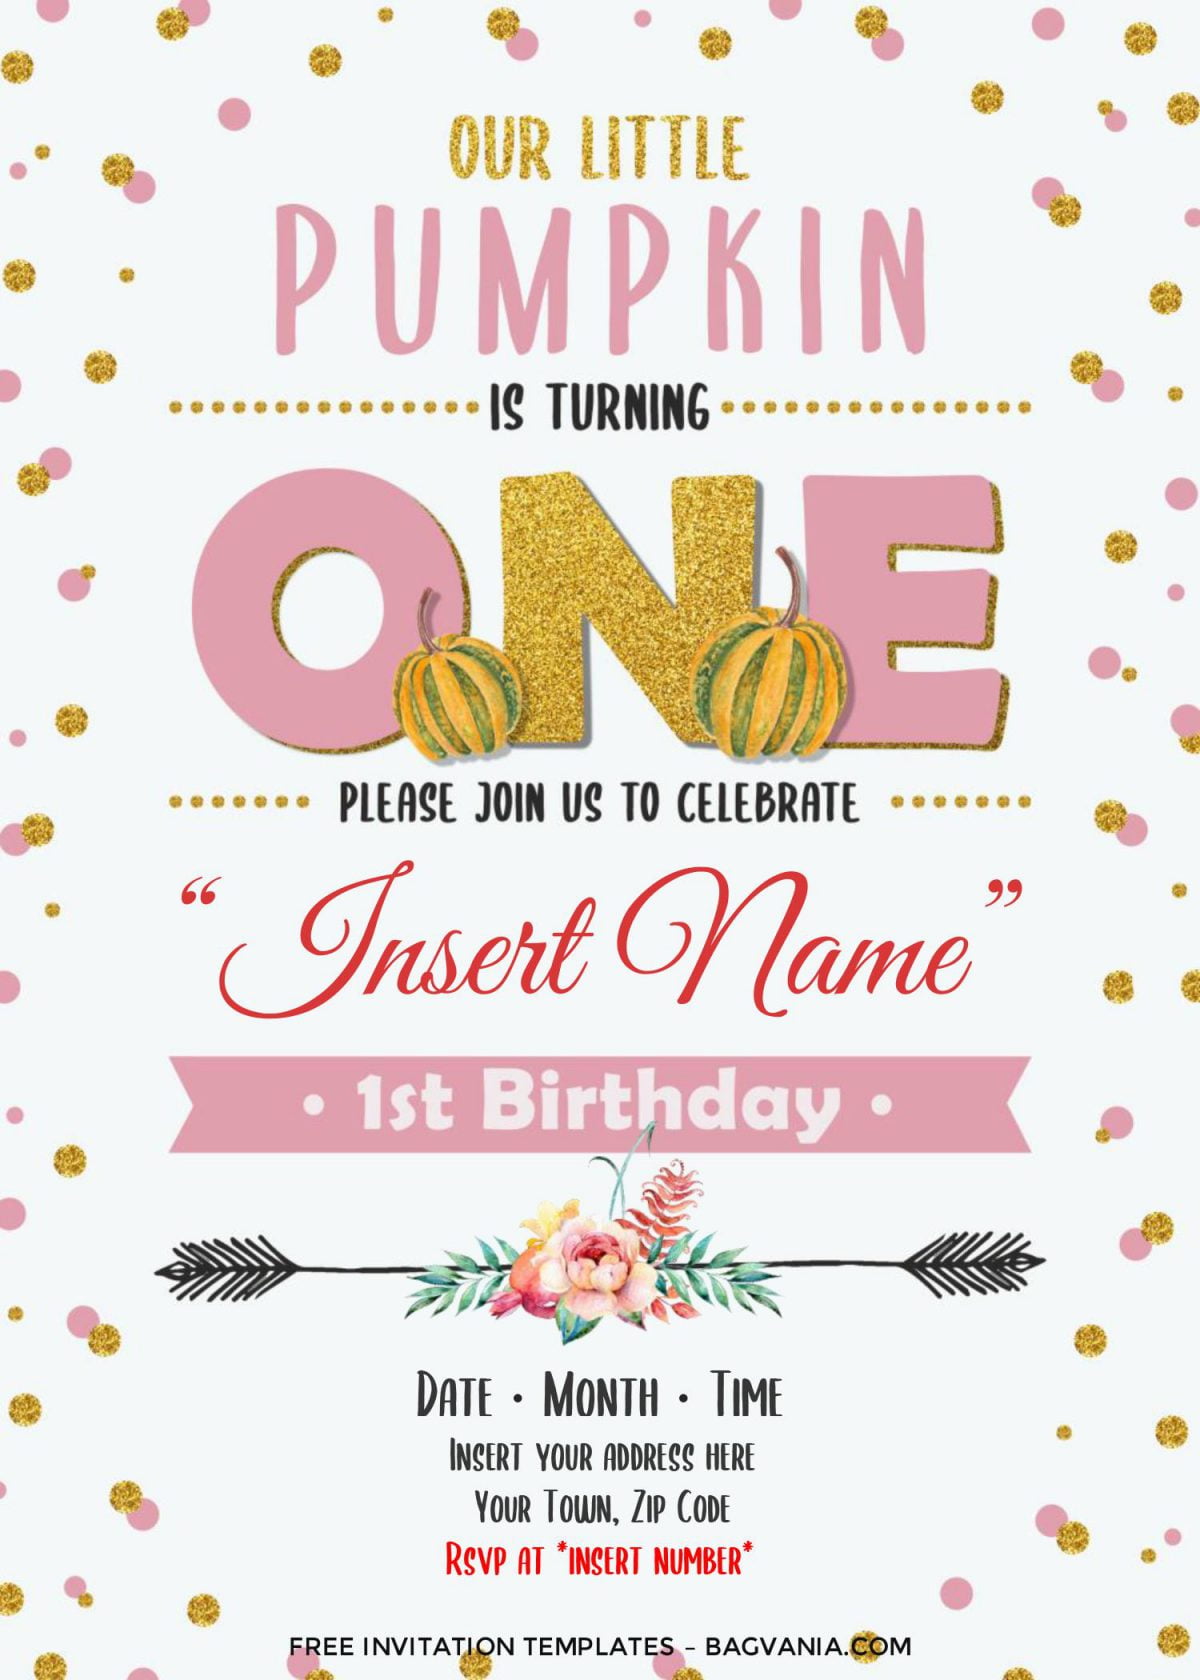 Free Pumpkin First Birthday Invitation Templates For Word and has portrait design and solid white background